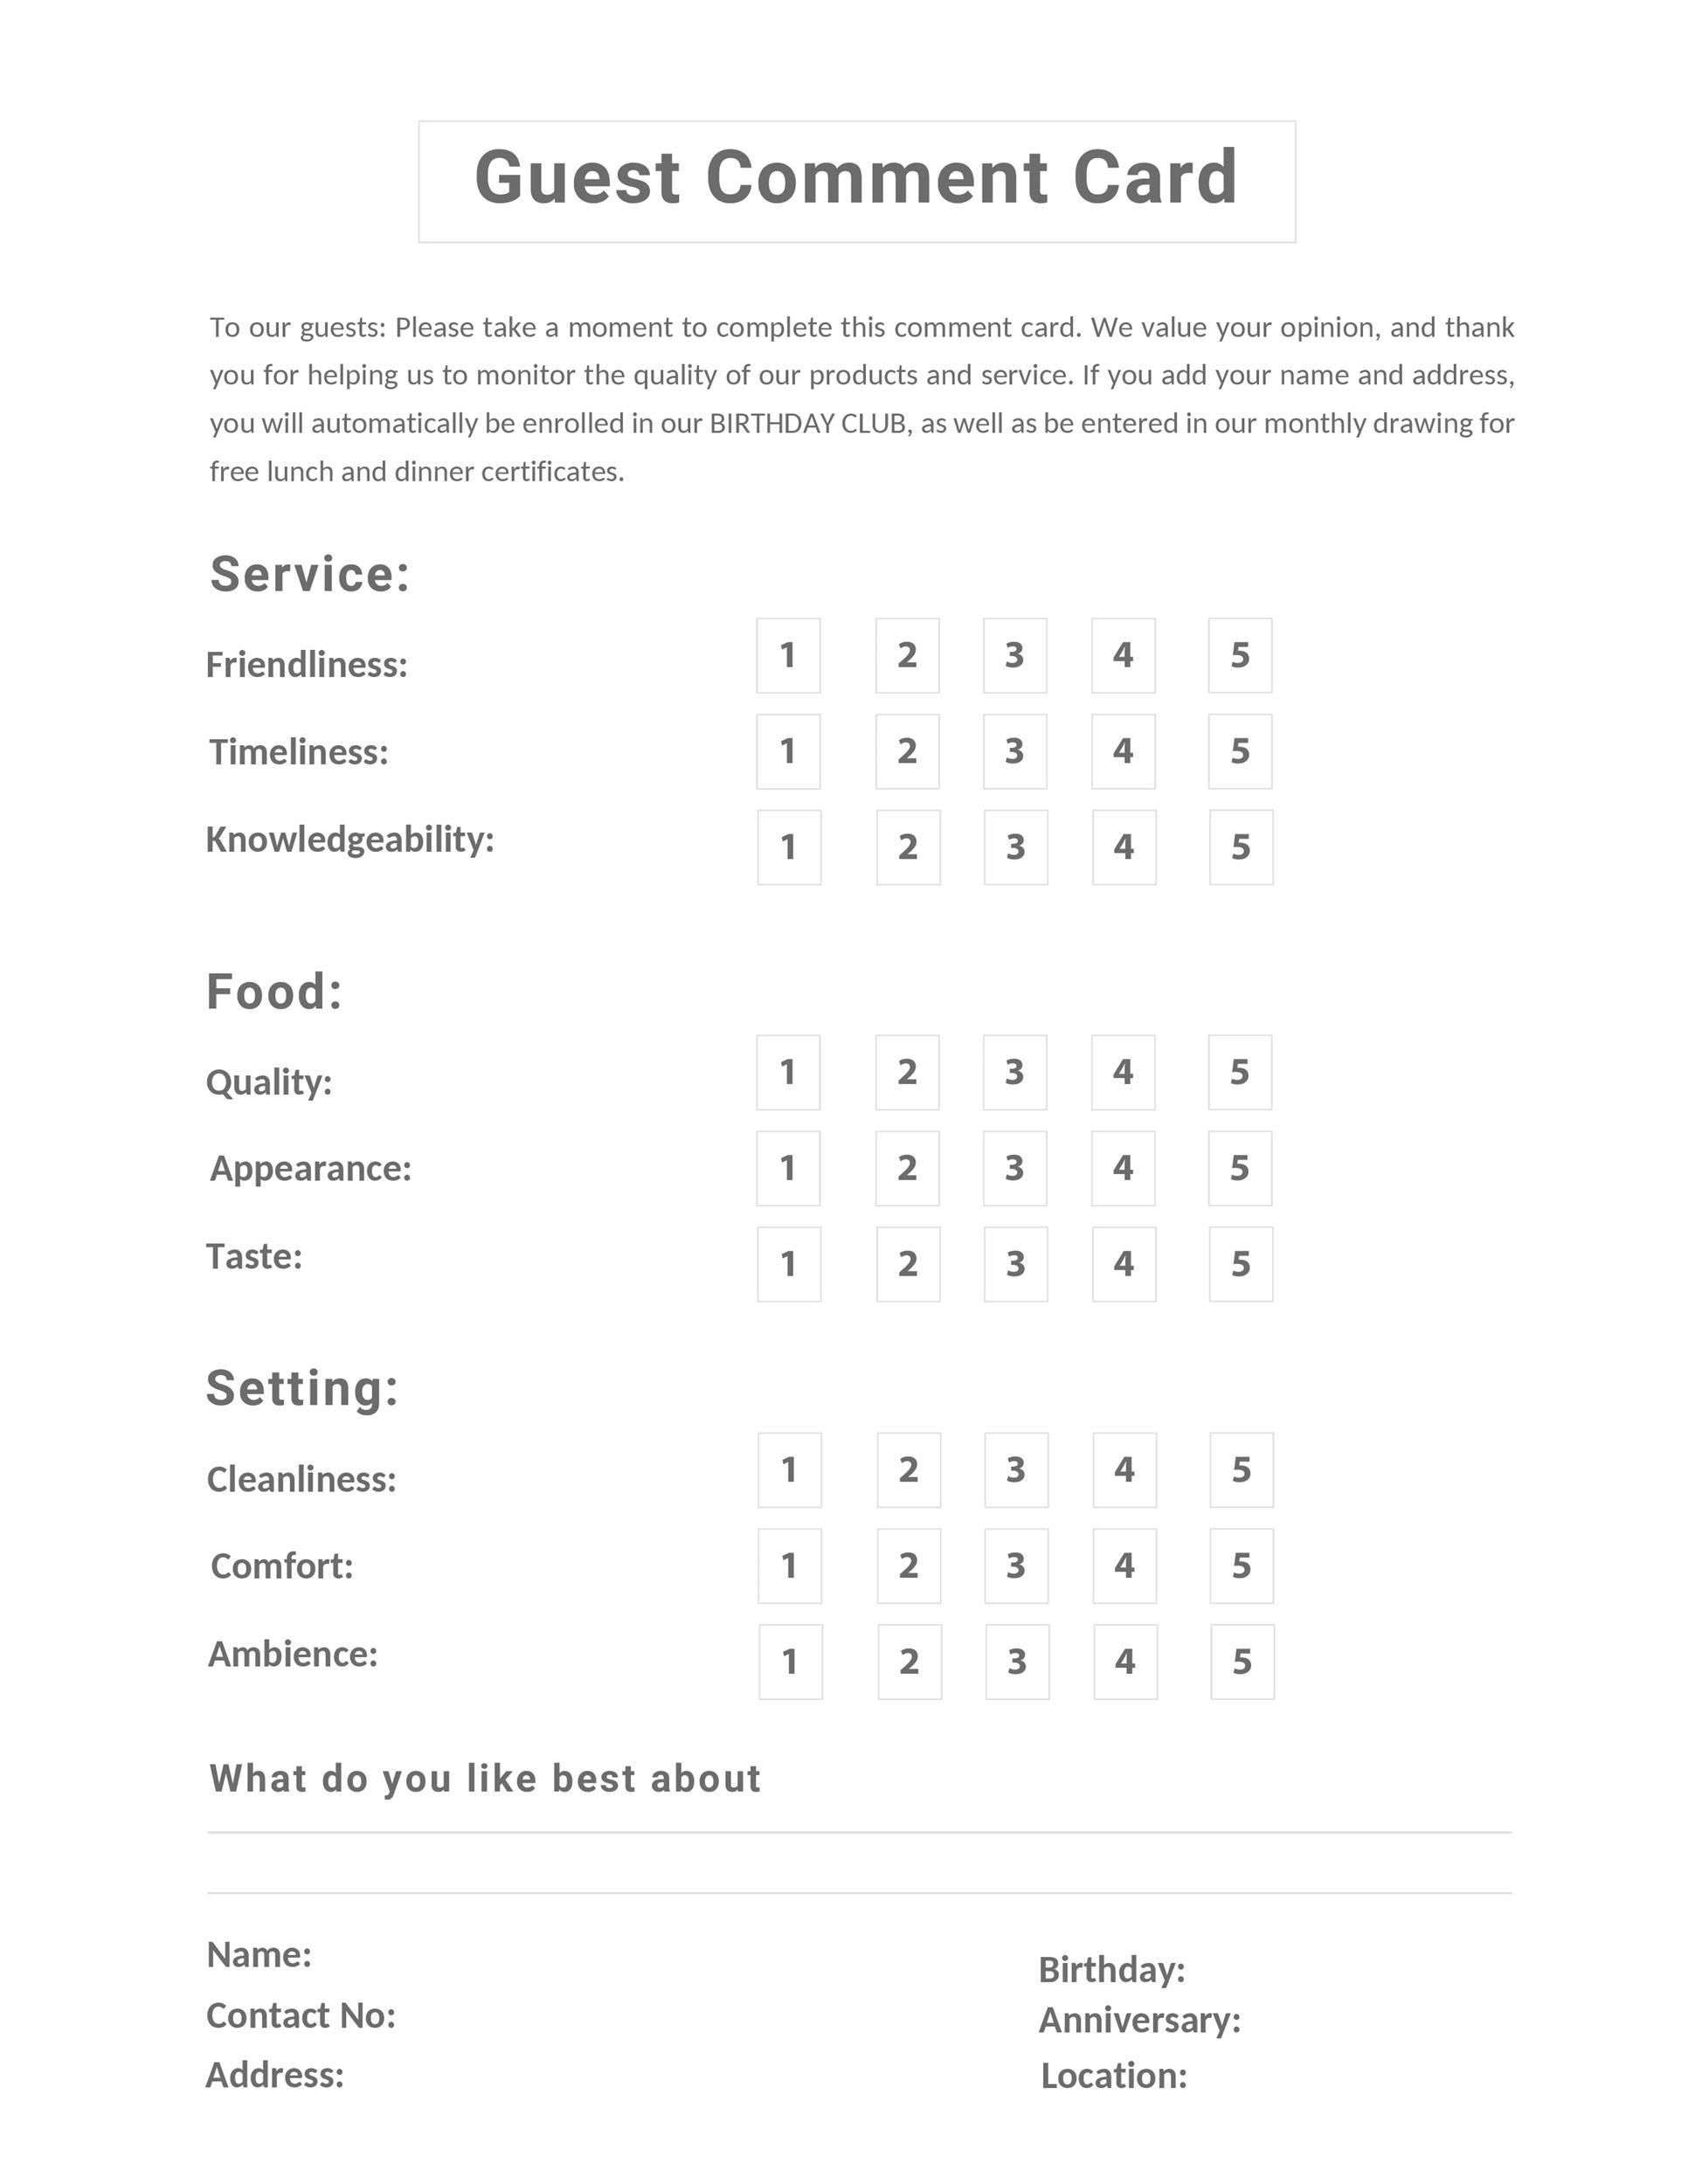 50 Printable Comment Card Feedback Form Templates ᐅ TemplateLab